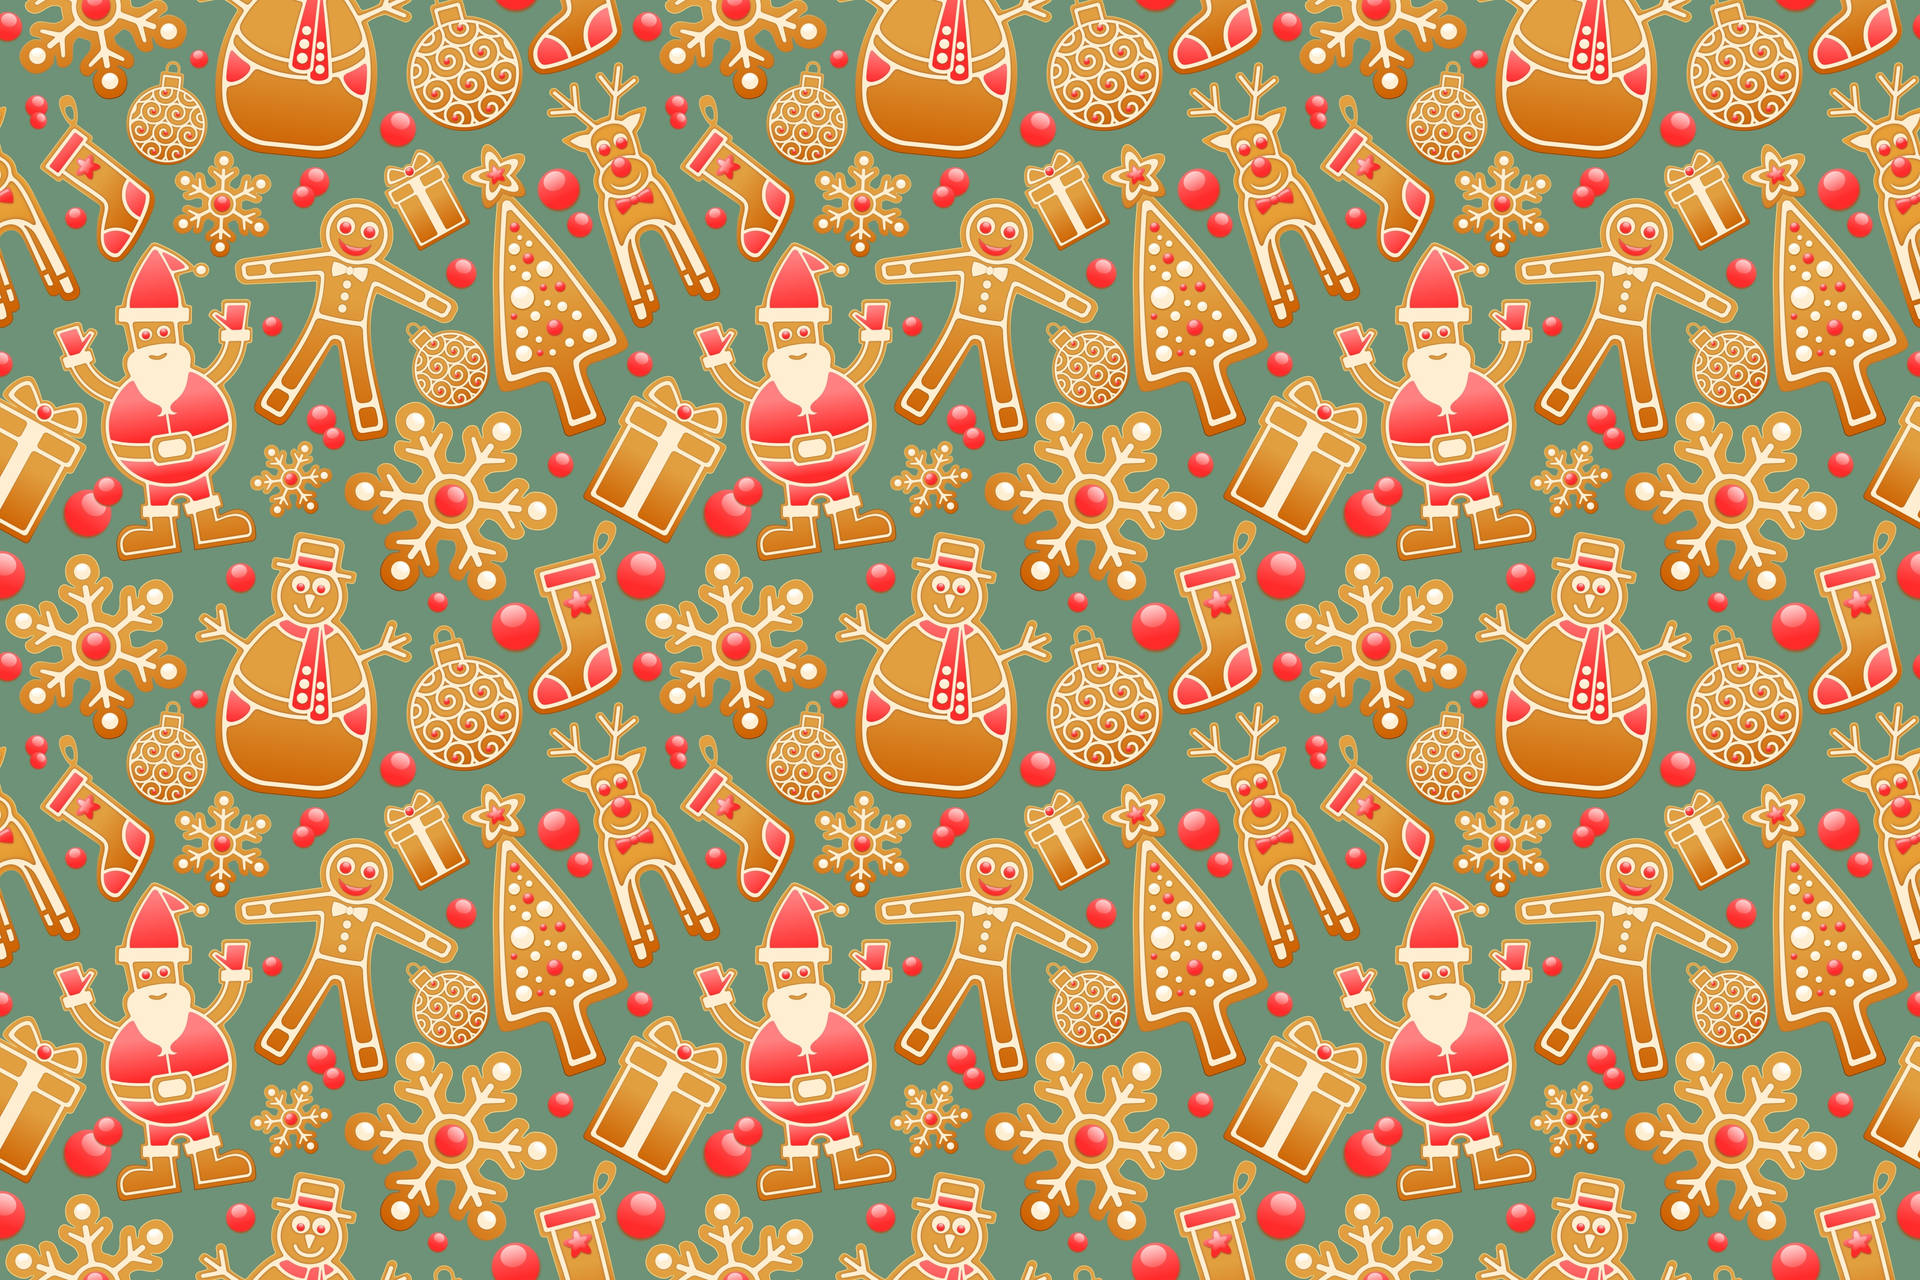 Top 999+ Gingerbread Wallpapers Full HD, 4K✅Free to Use